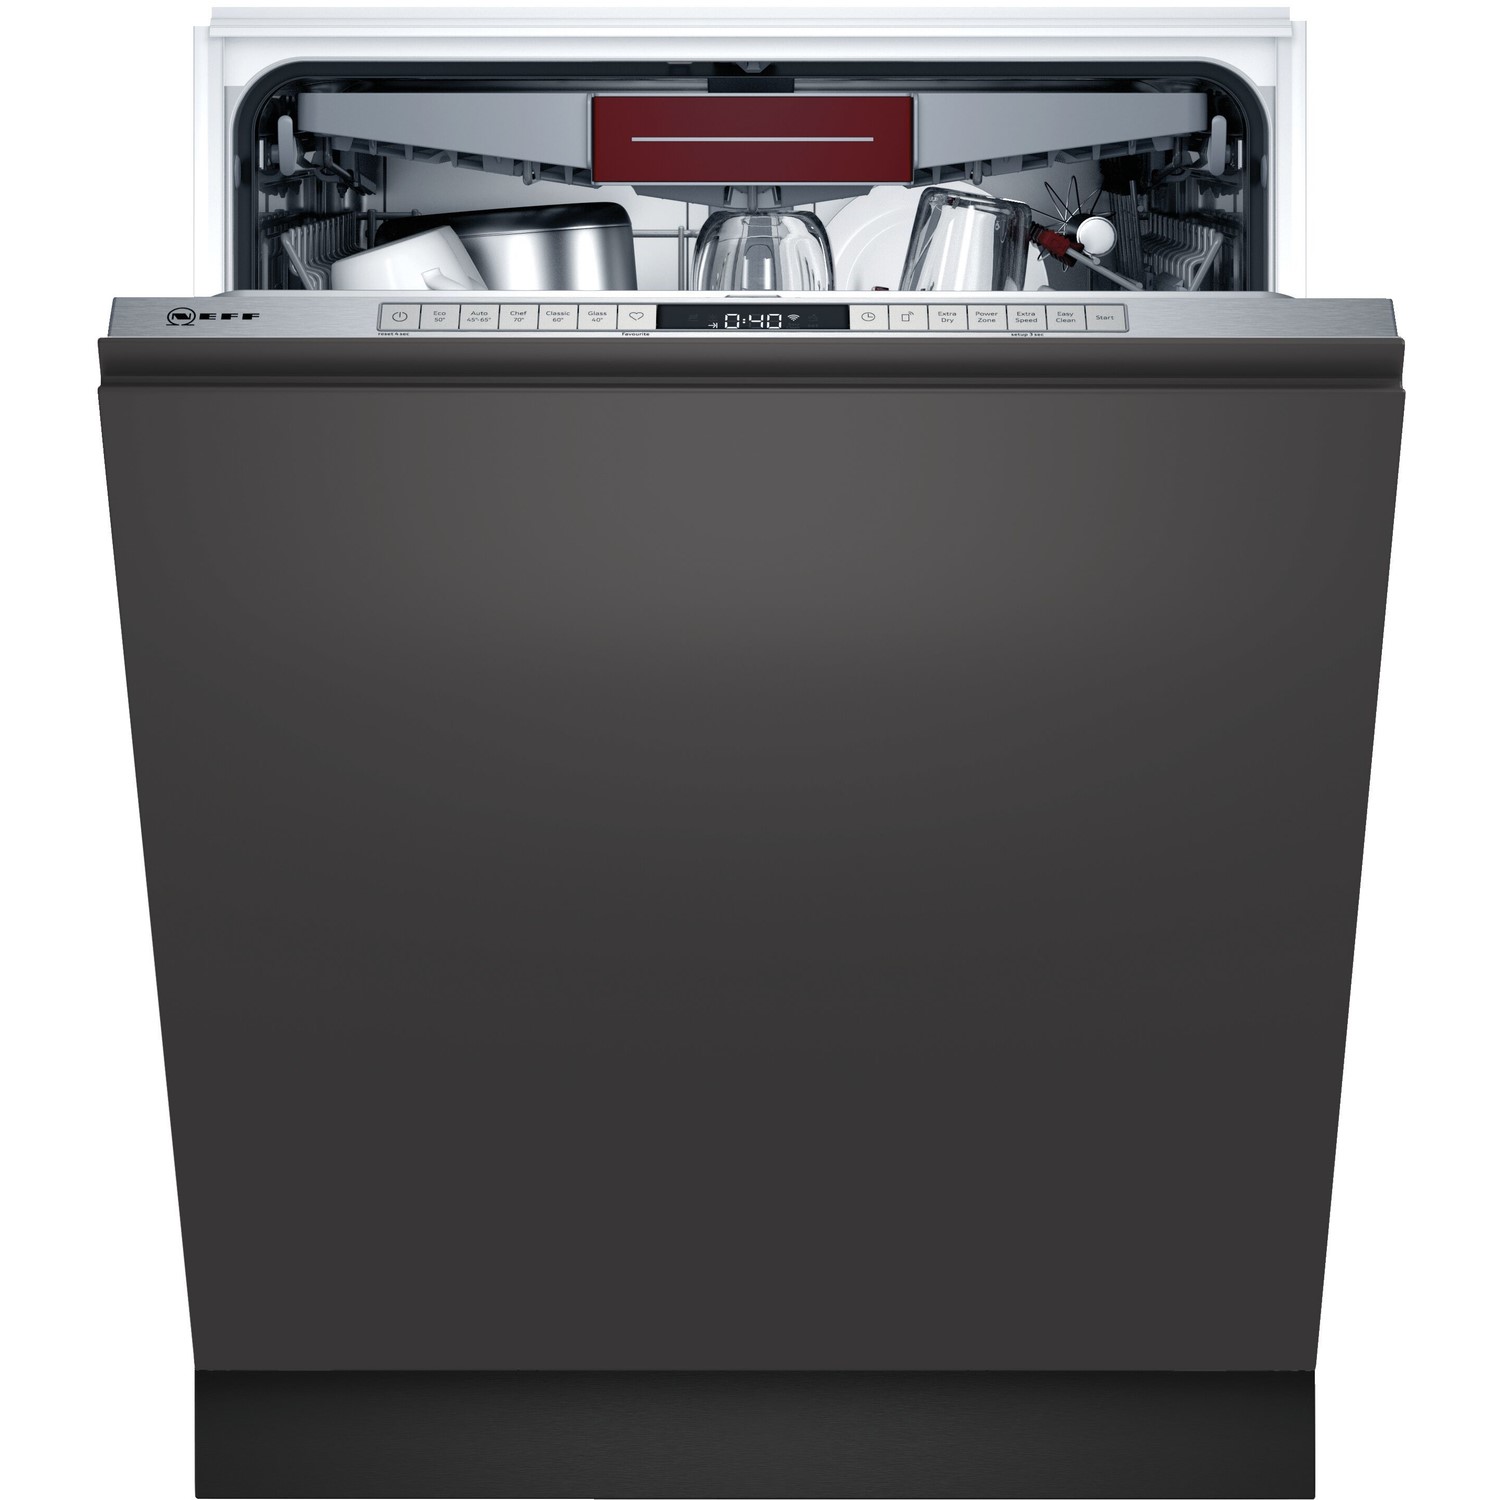 Refurbished Neff N50 S155HCX27G 14 Place Fully Integrated Dishwasher